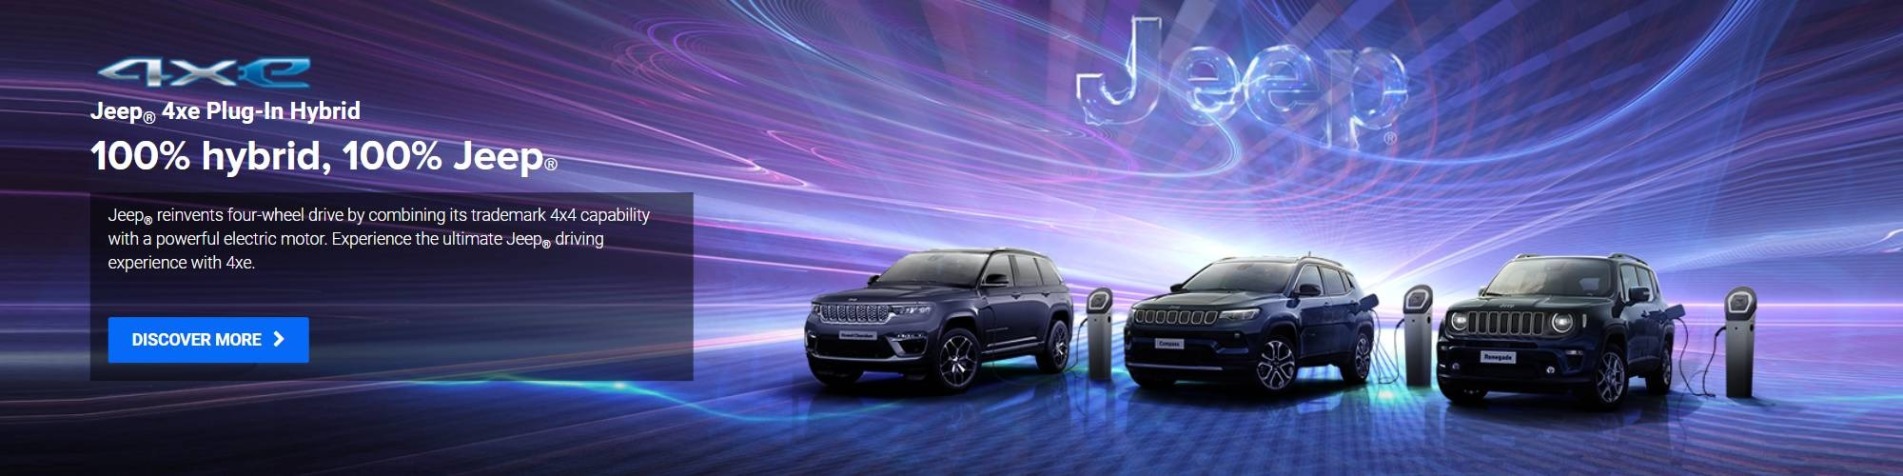 Jeep Hybrid Banner Two